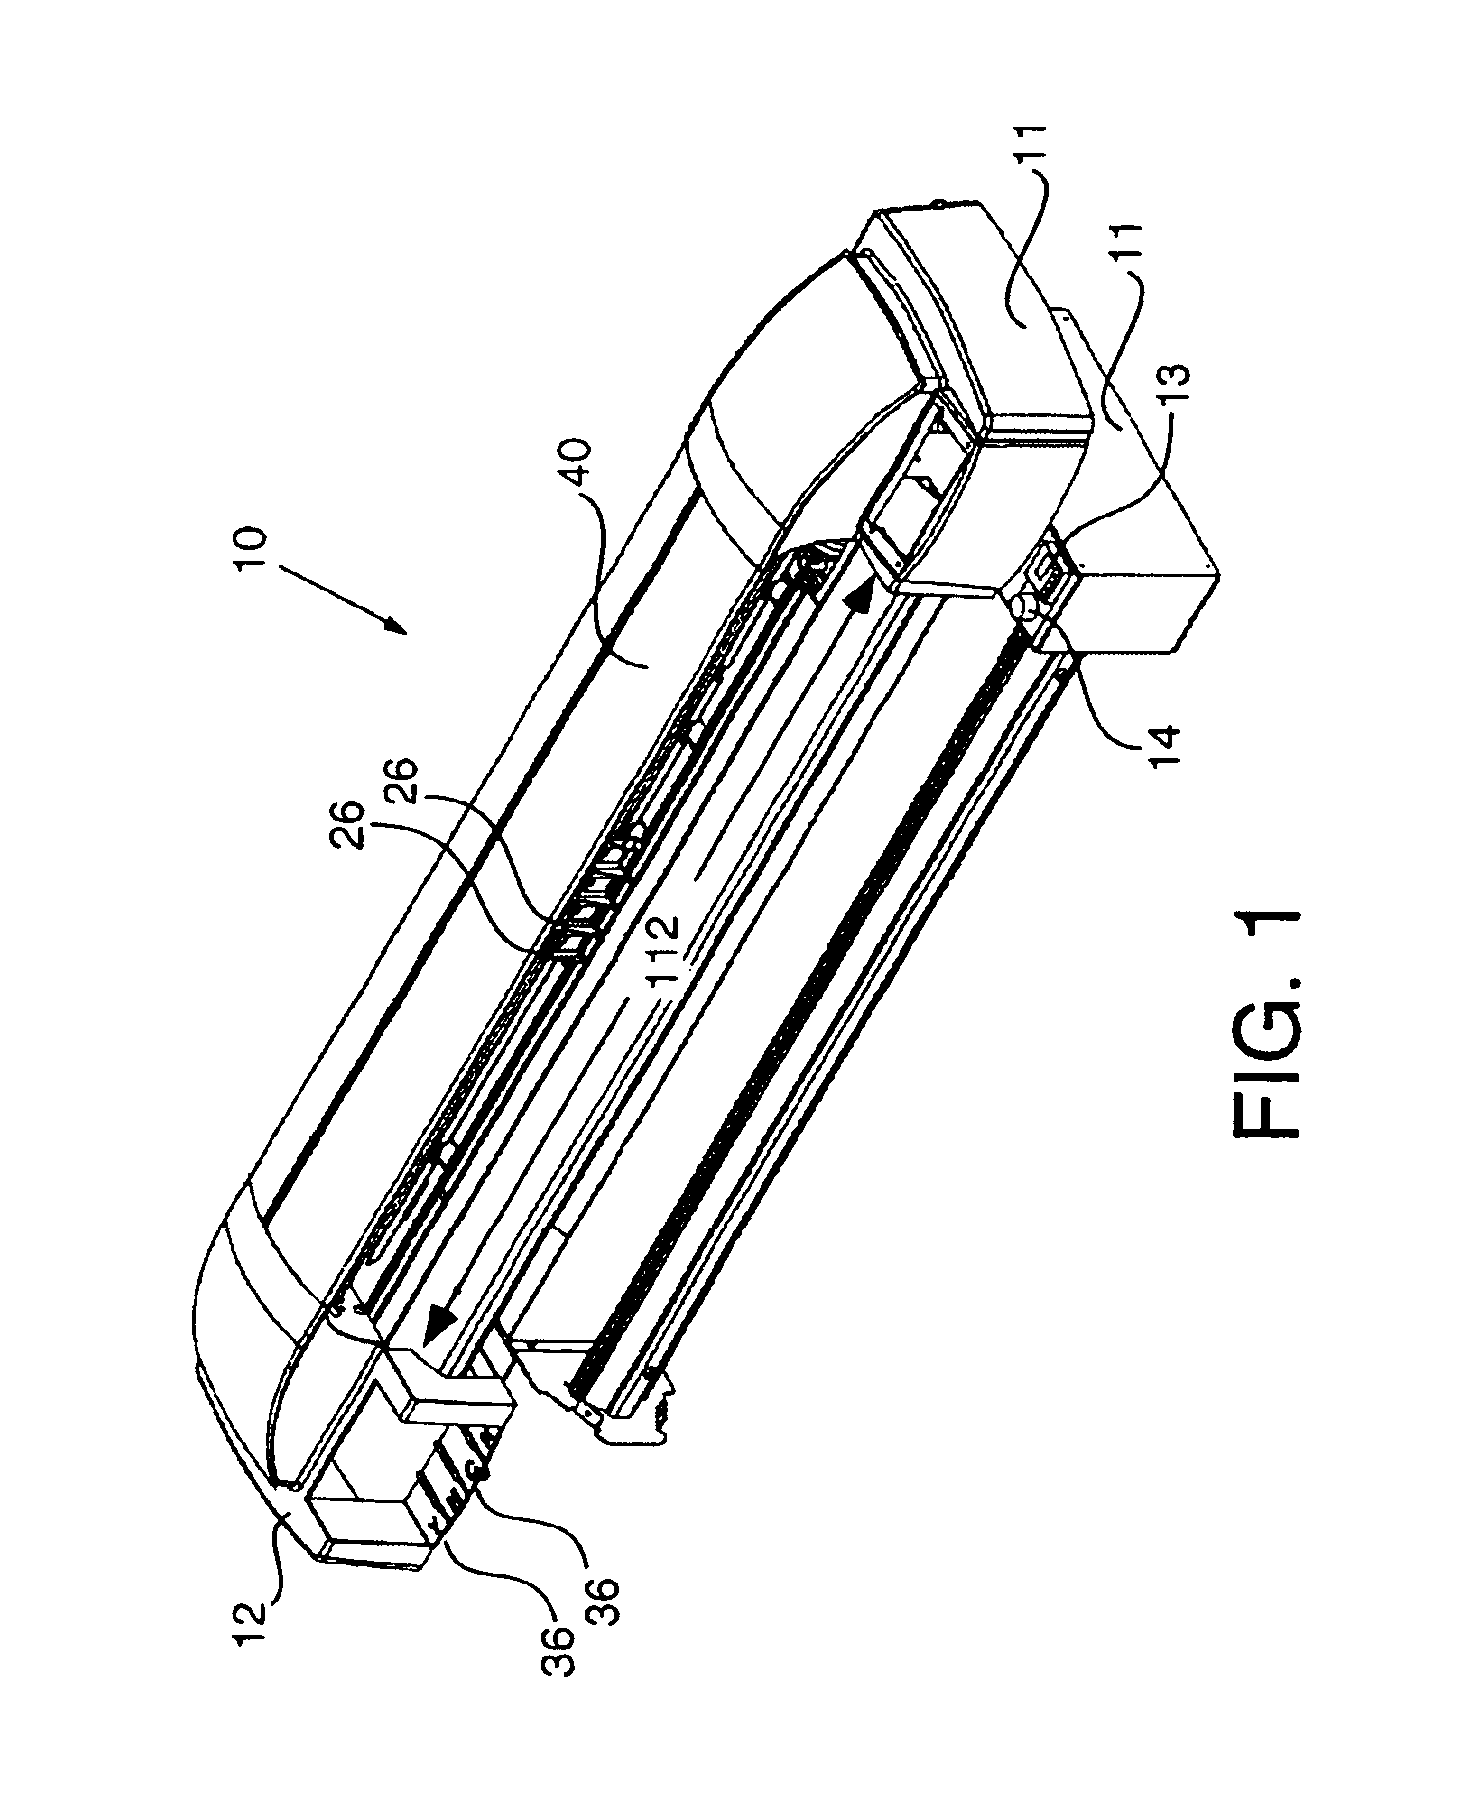 Apparatus and method of inkjet printing on untreated hydrophobic media